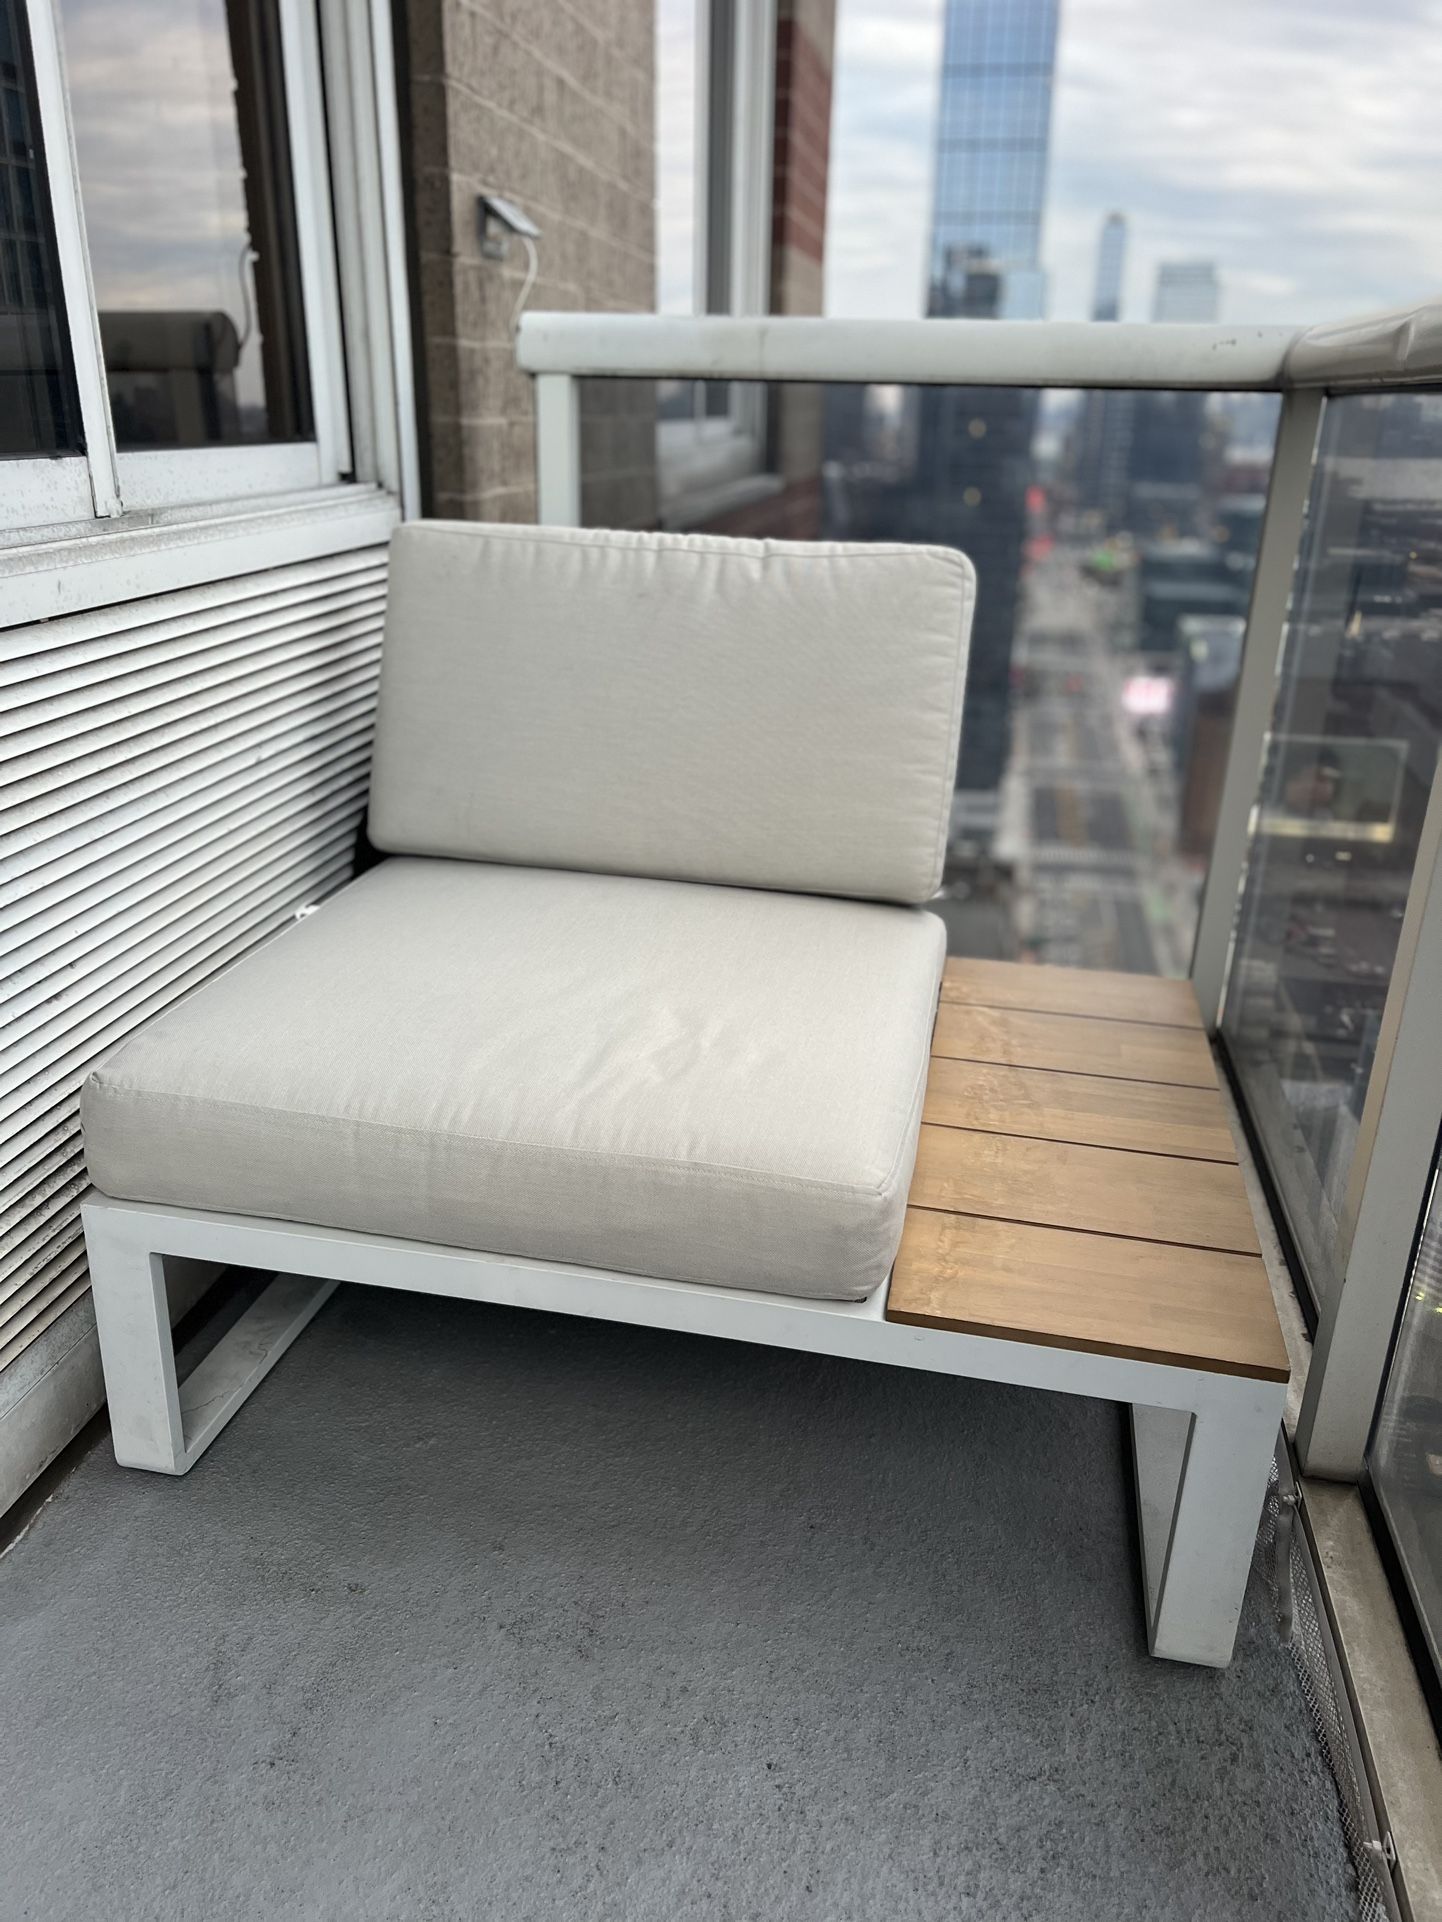 Outdoor Furniture Couch Chair With Table 